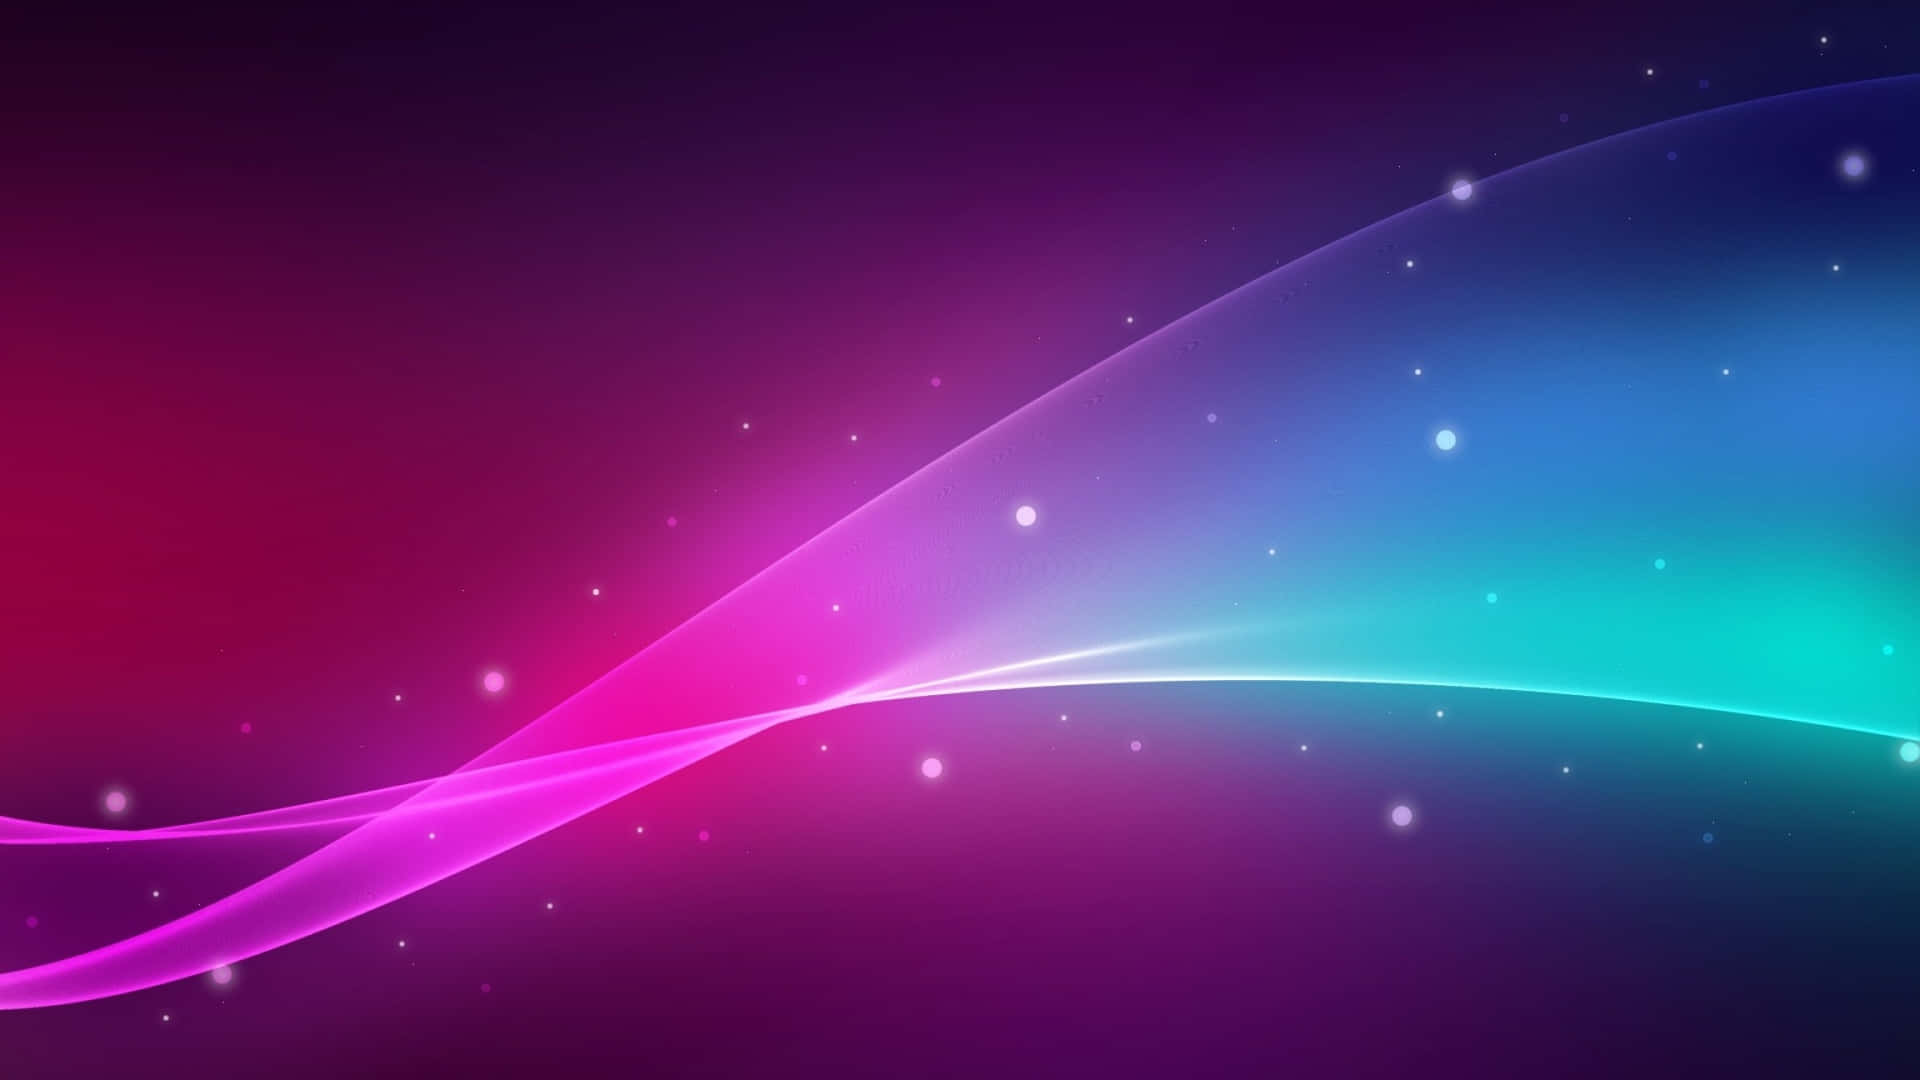 A modern, vibrant background wallpaper featuring shades of purple and pink